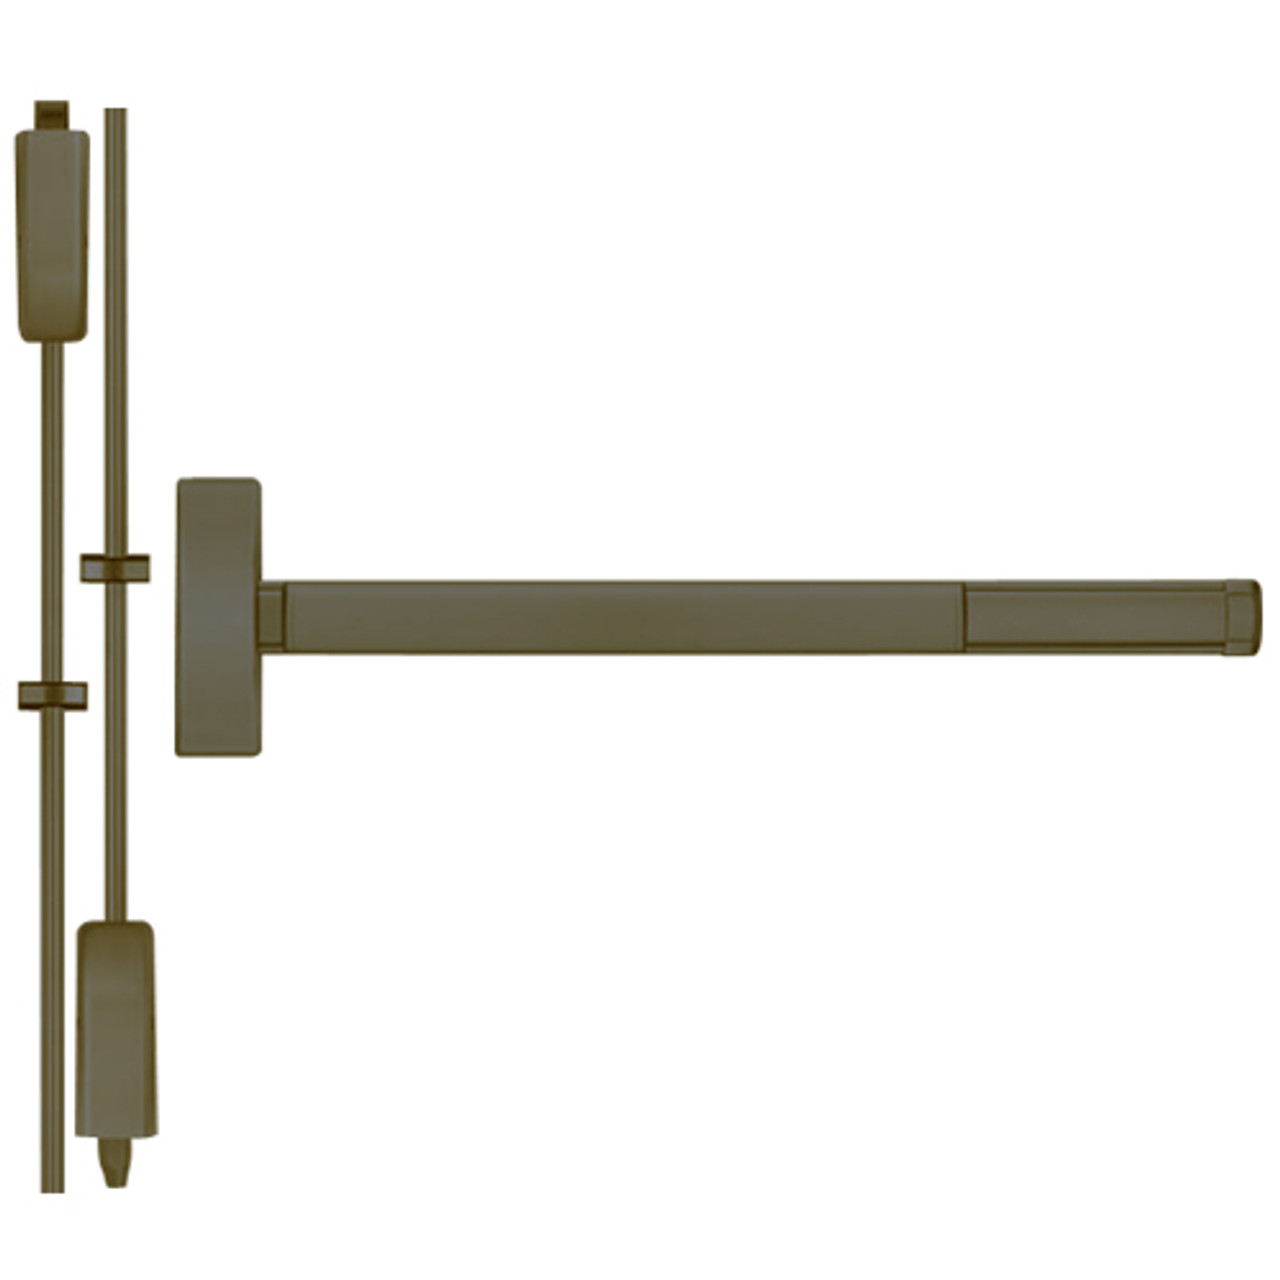 DEFL2203LBR-613-36 PHI 2200 Series Fire Rated Apex Surface Vertical Rod Device with Delayed Egress Prepped for Key Retracts Latchbolt in Oil Rubbed Bronze Finish